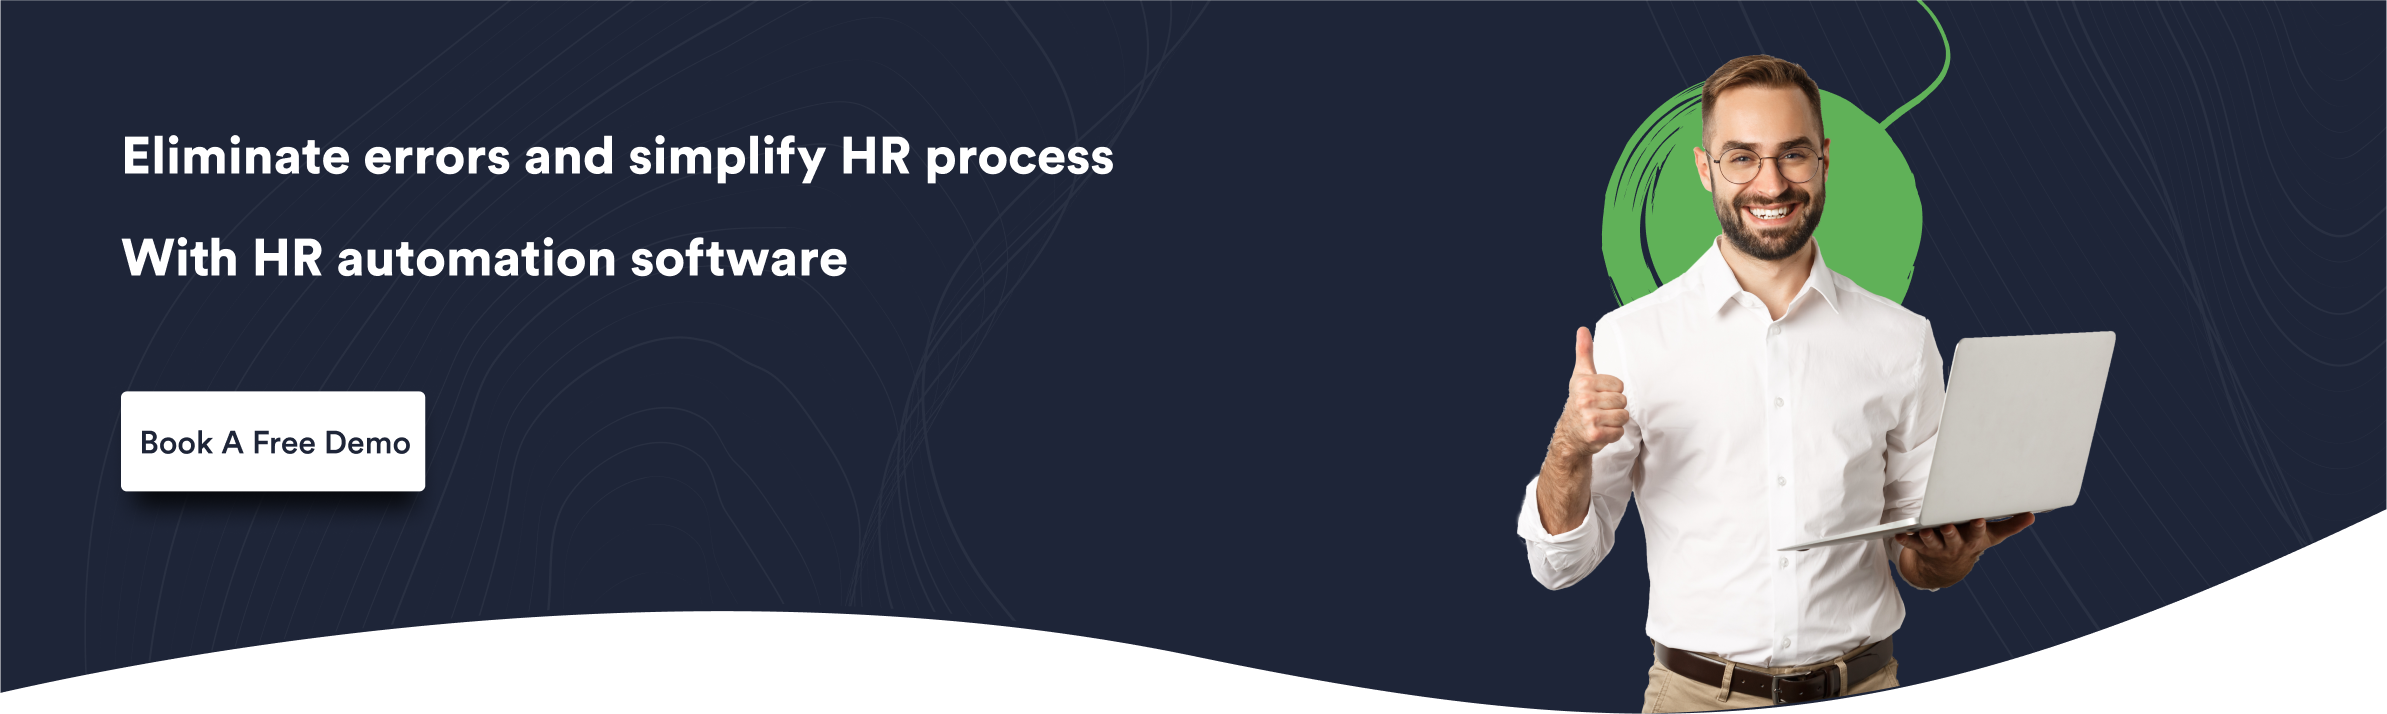 Eliminate errors and simplify HR process